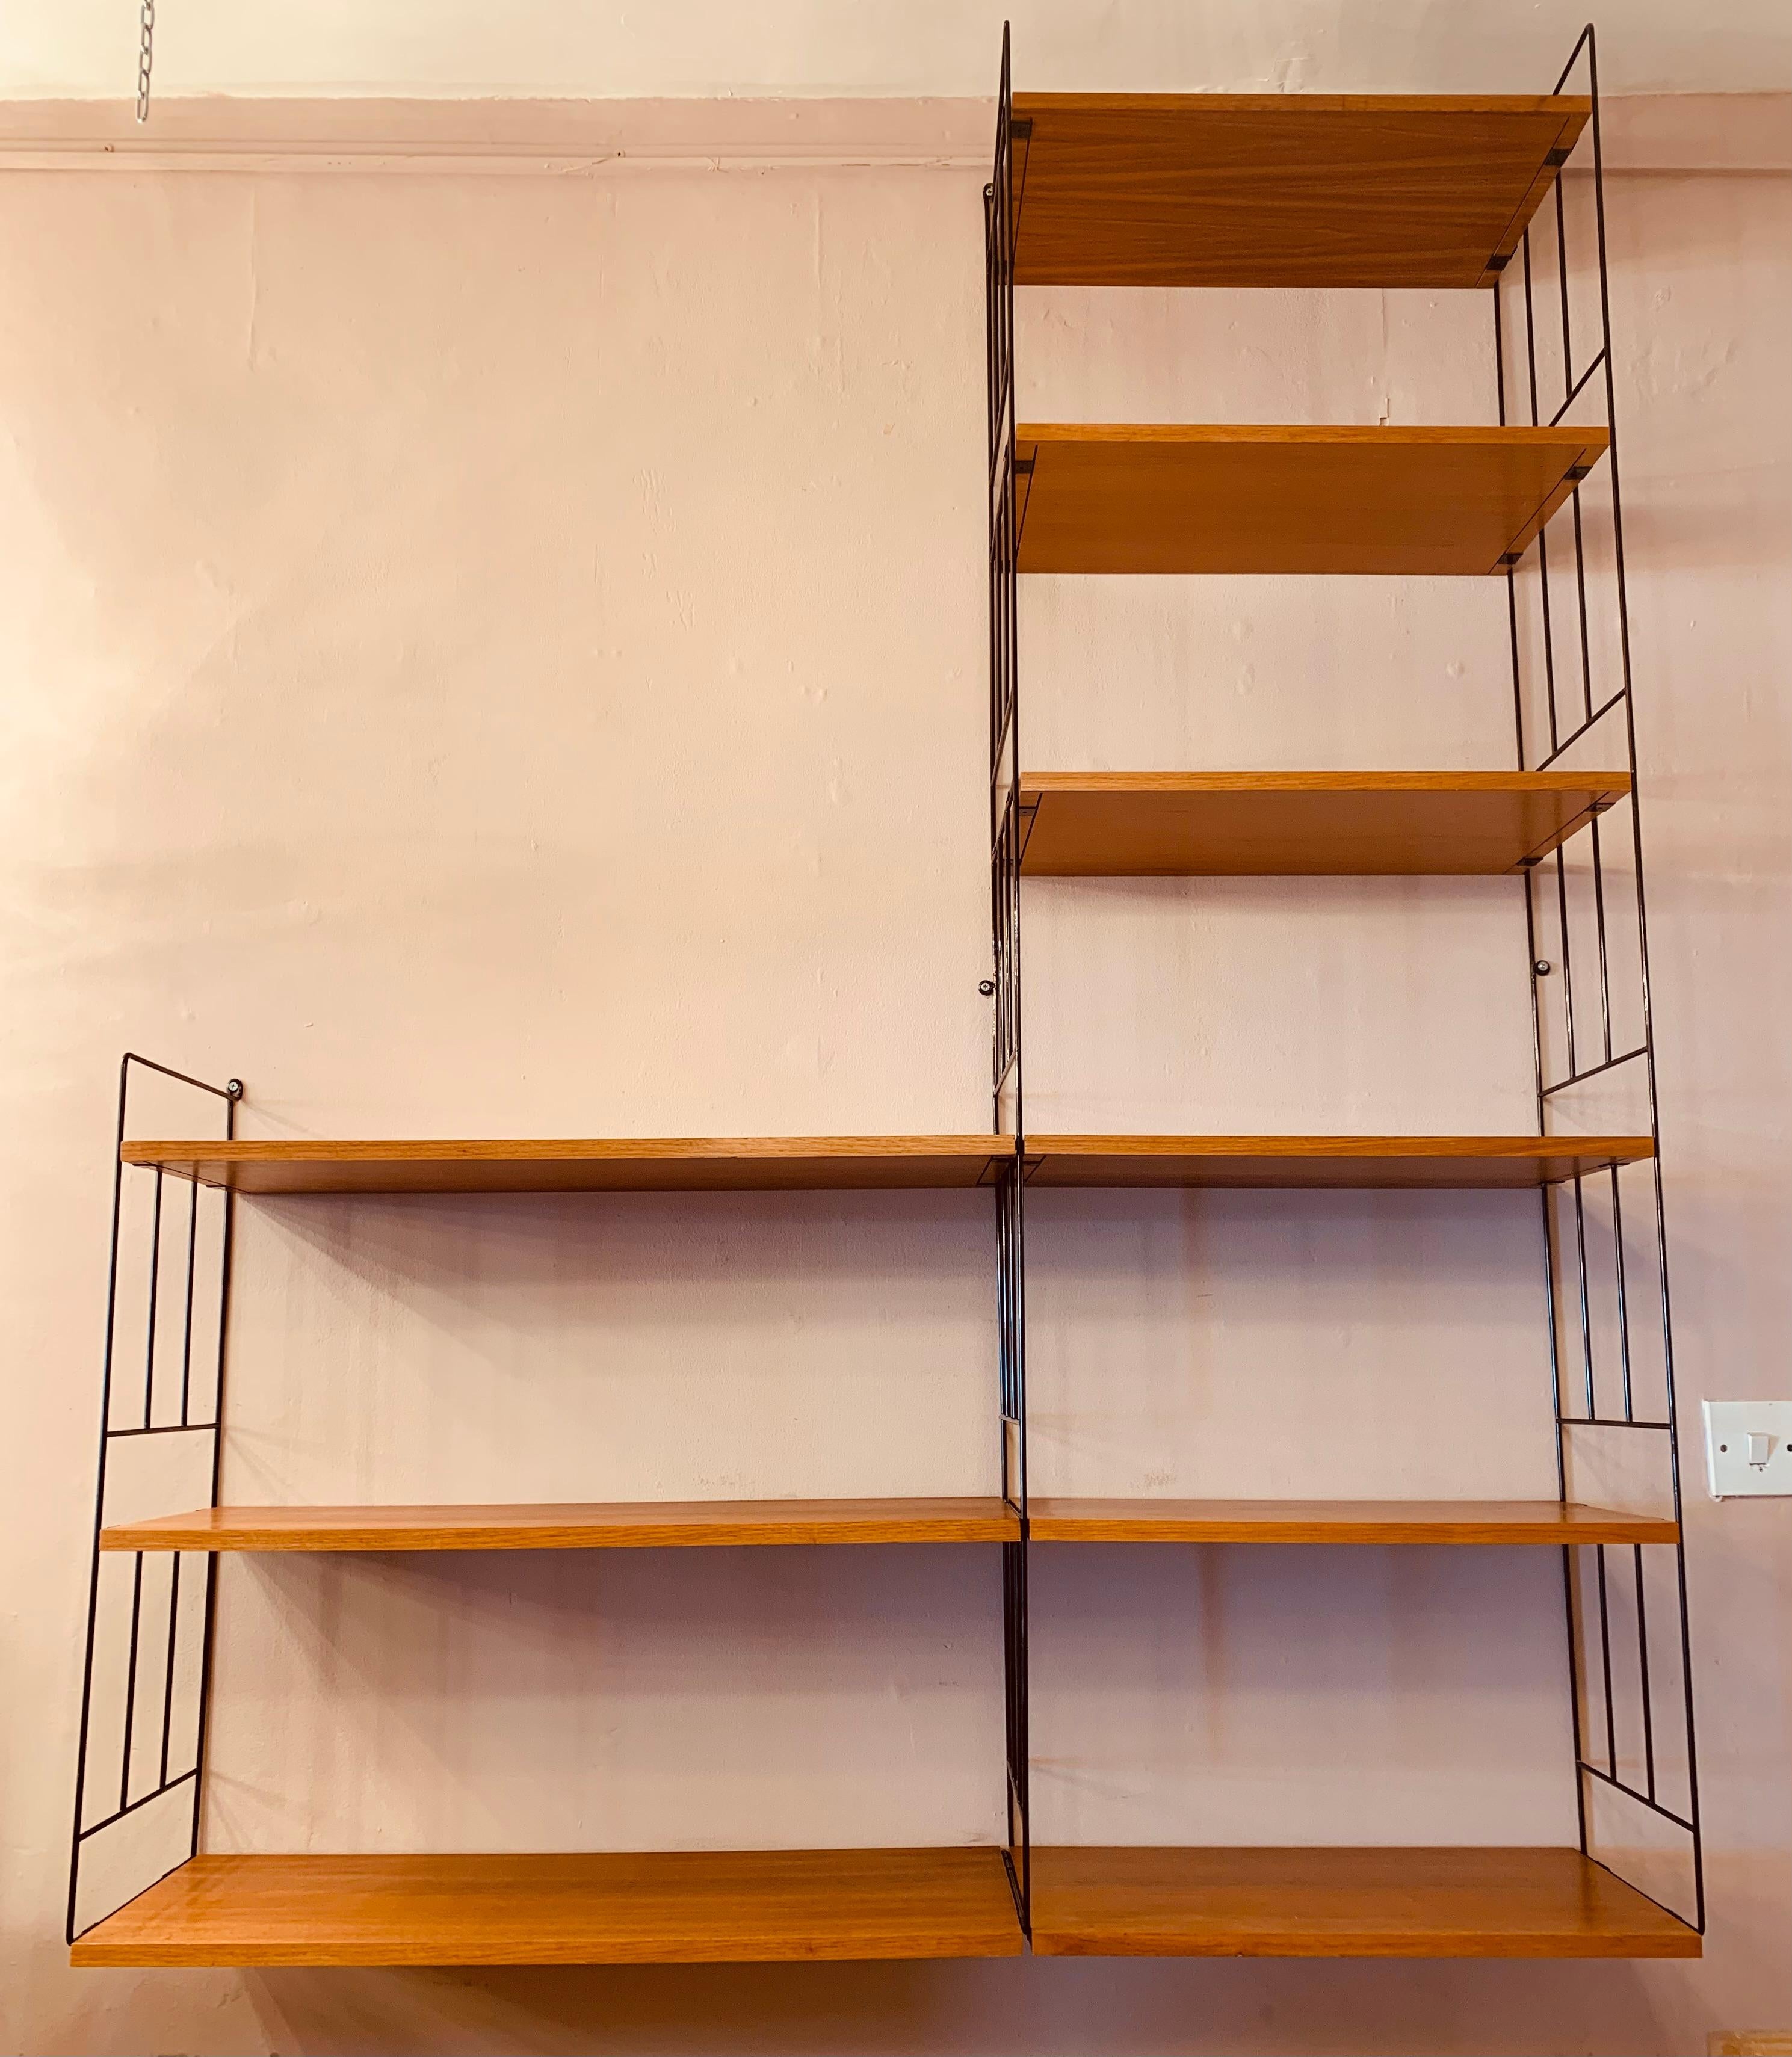 1960s, mid century, wall-mounted, hanging-ladder shelving system, produced by WHB in Germany. The system features three black metal string ladders, which are screwed into the wall to hold the Teak, veneered shelves in place, which easily clip onto